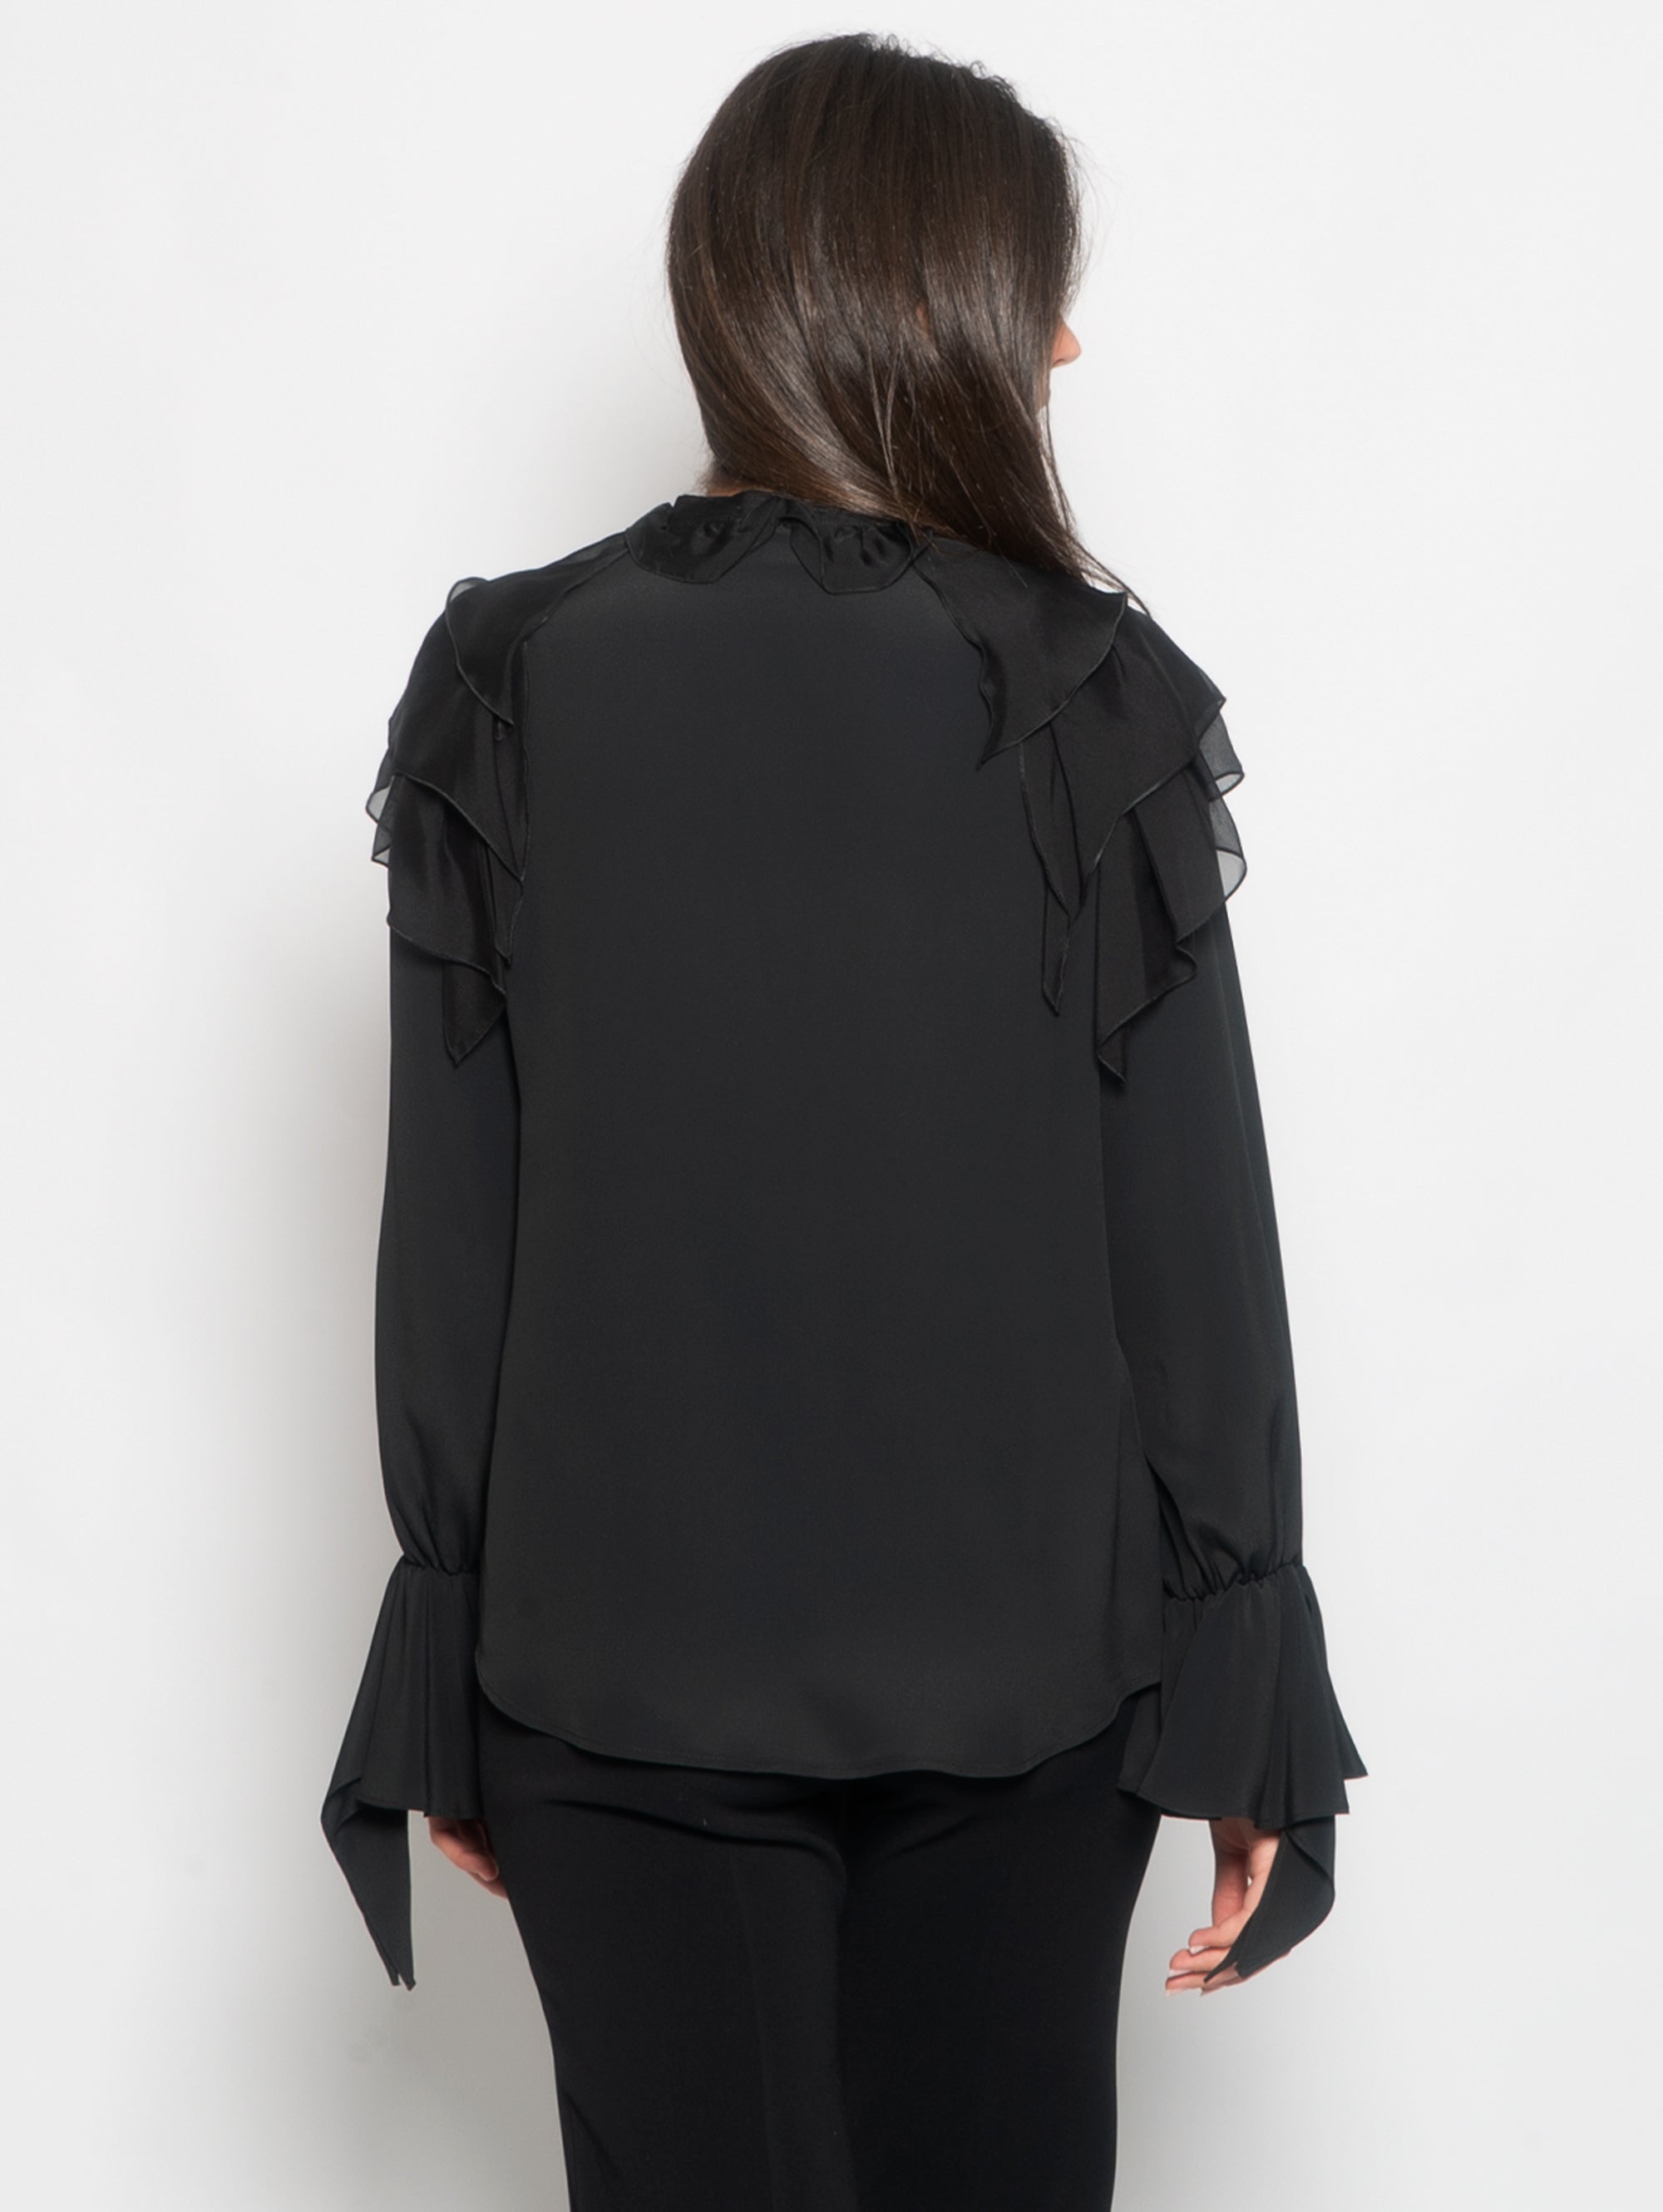 Blouse with Cascade of Black Ruffles